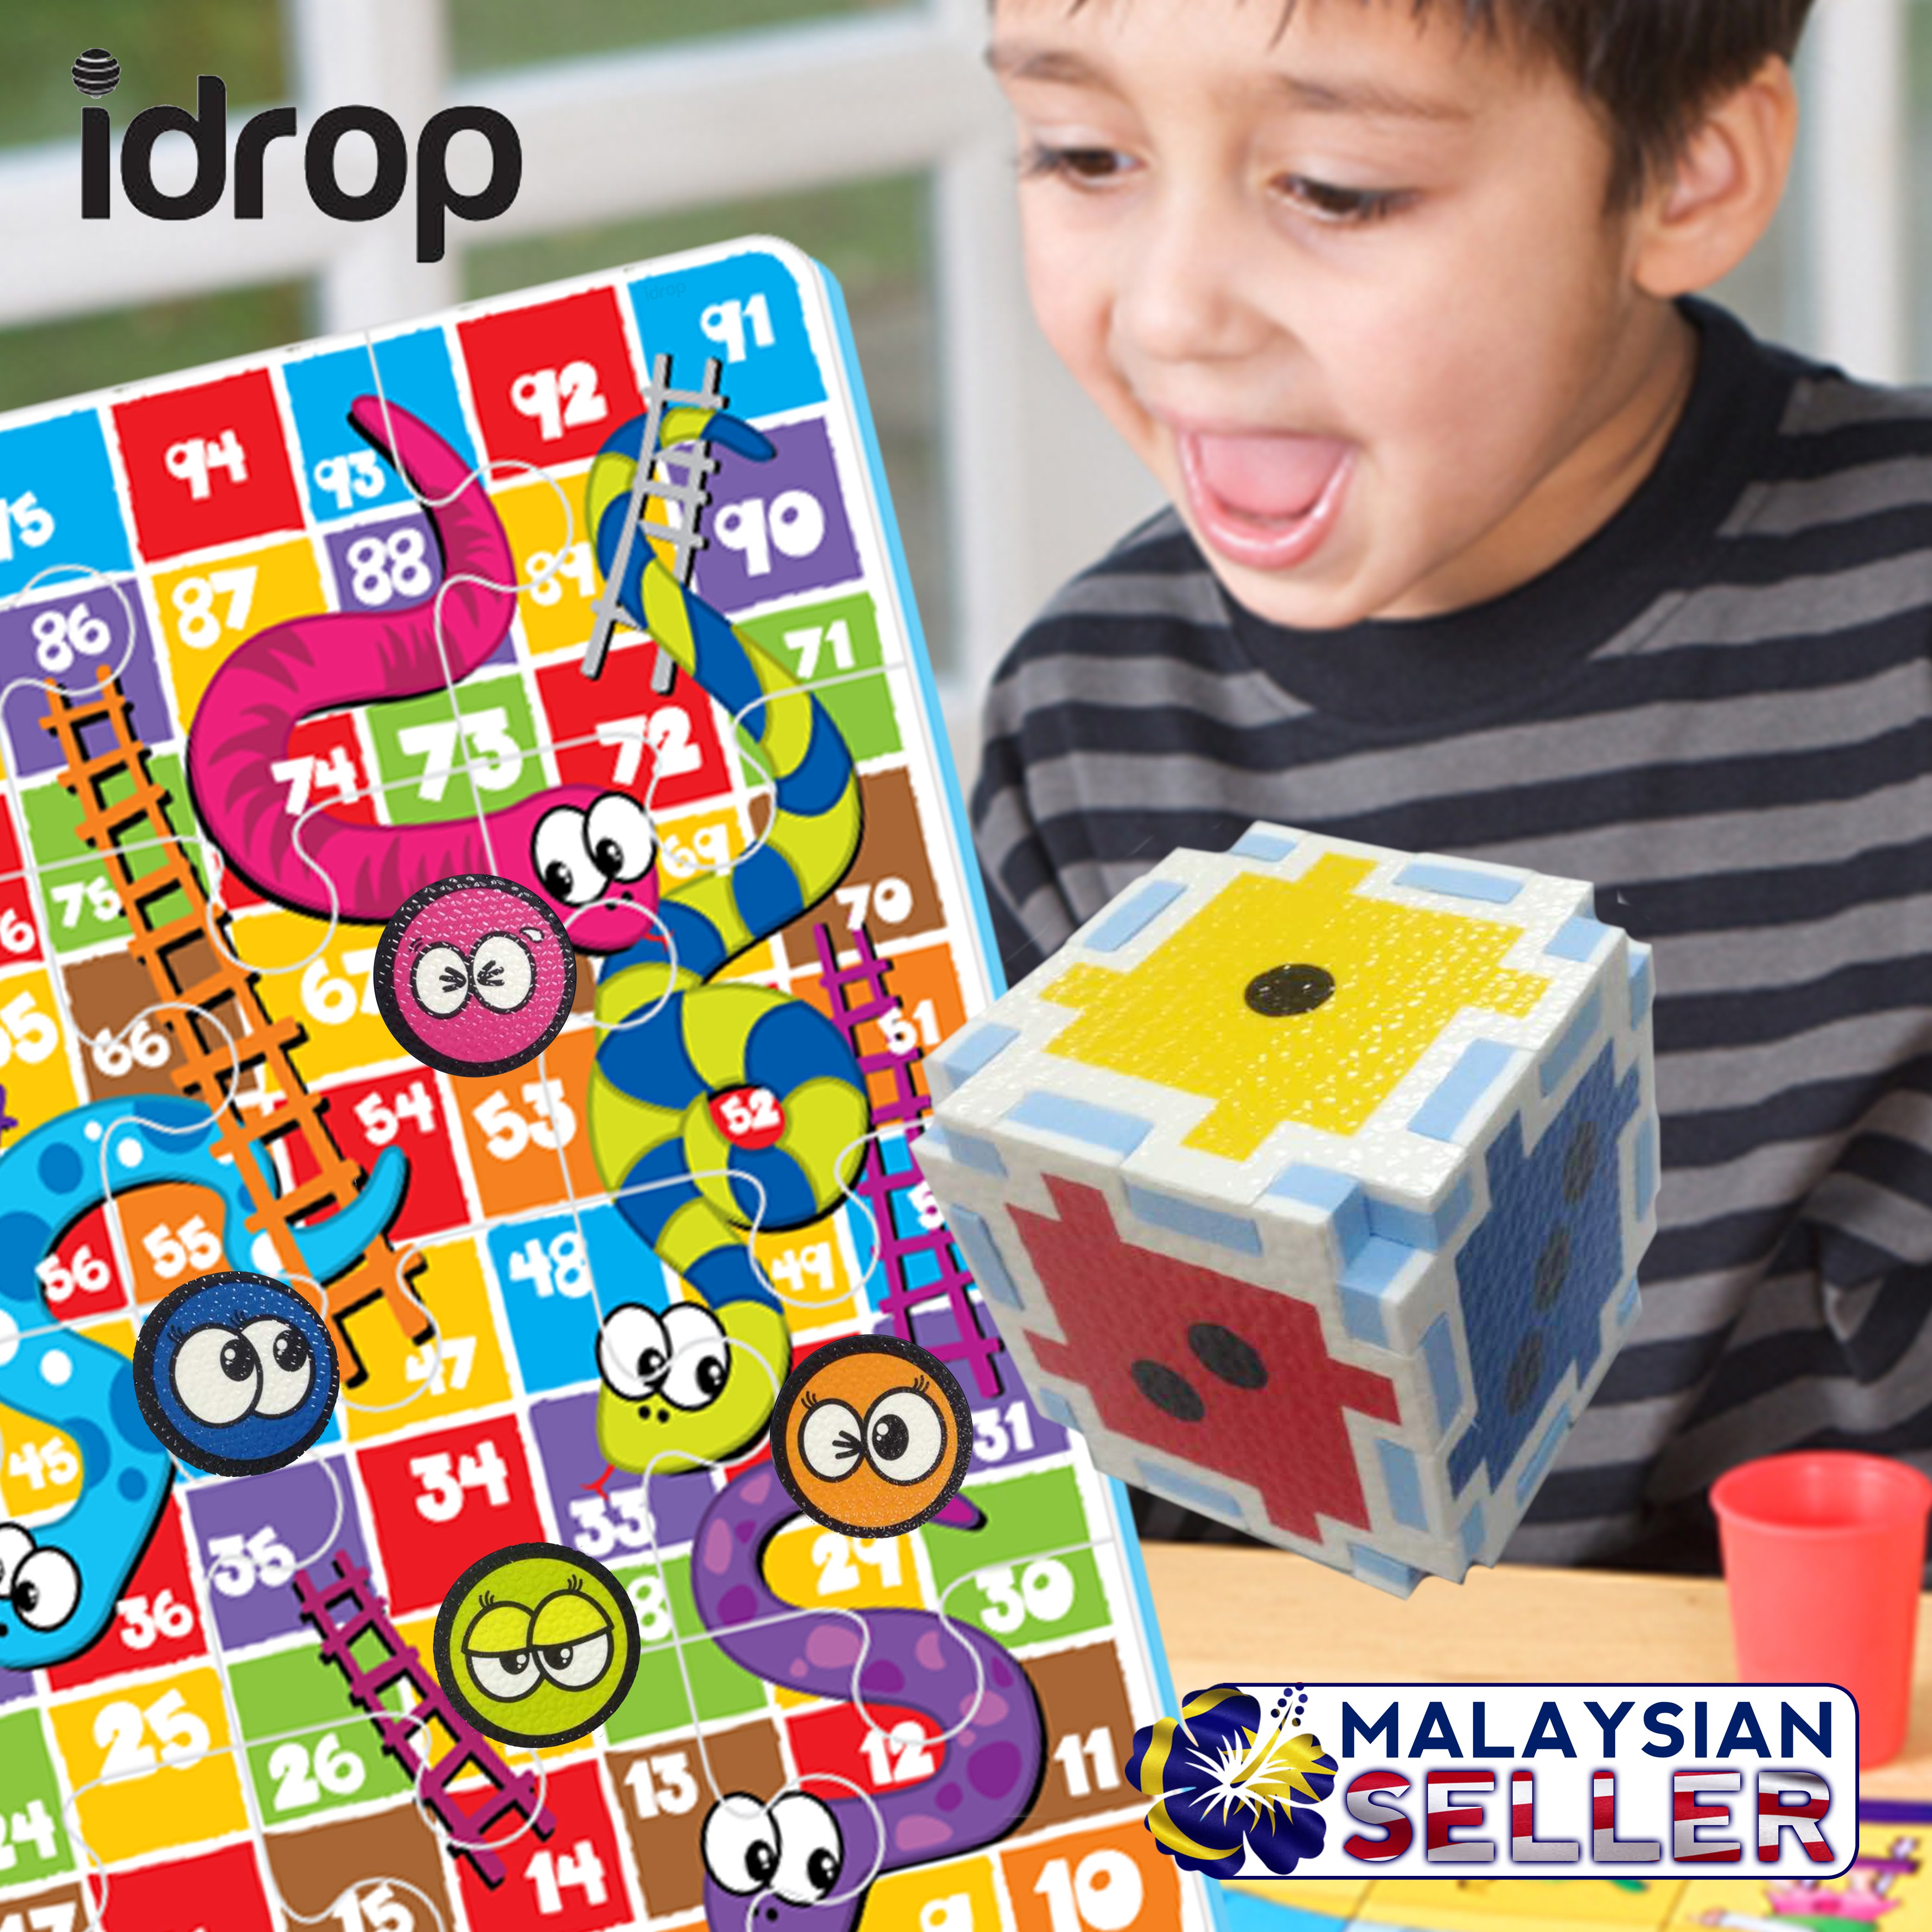 Idrop Snakes And Ladders Puzzle Mat Giant Floor Puzzle Game Idrop